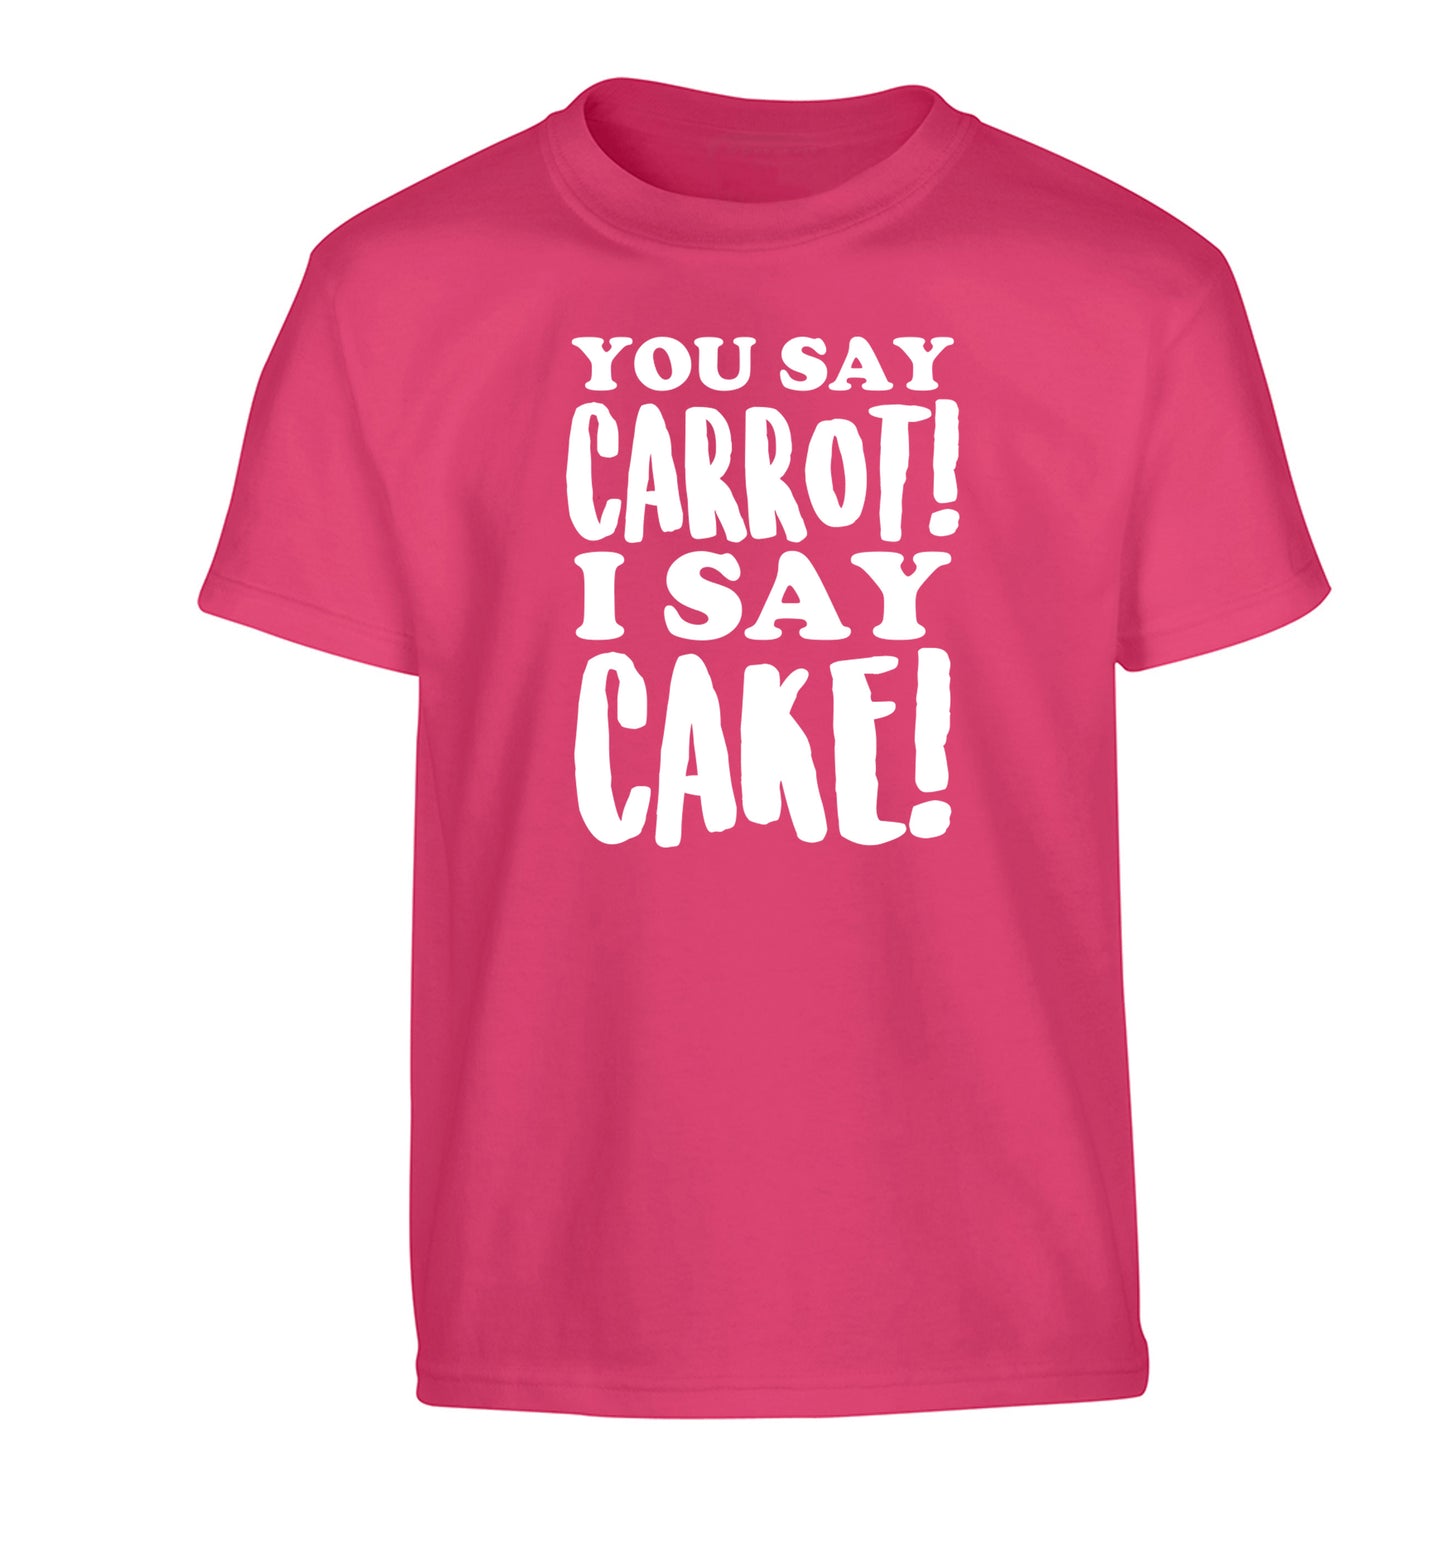 You say carrot I say cake! Children's pink Tshirt 12-14 Years